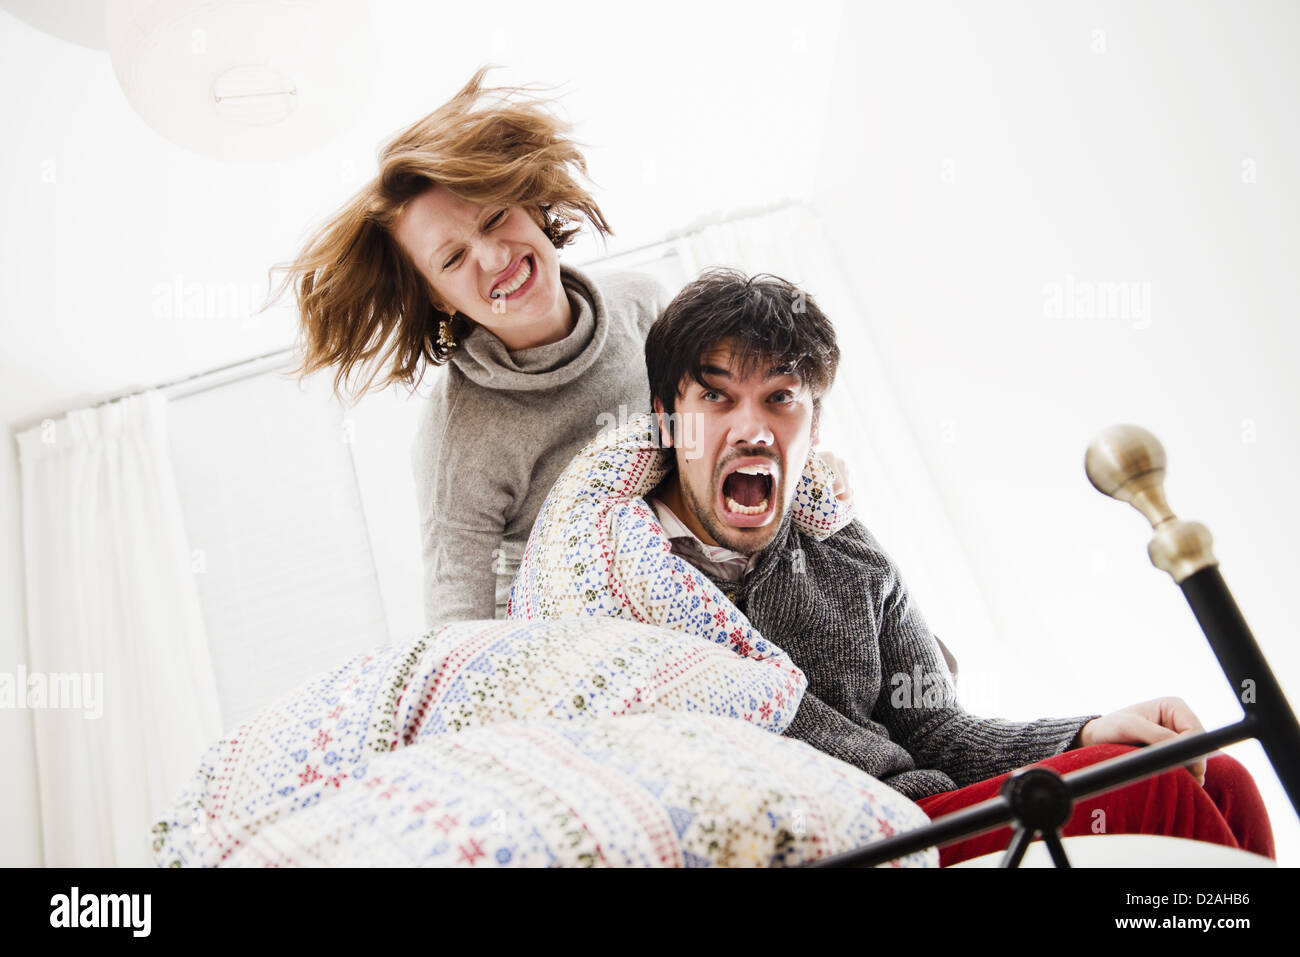 Smiling couple playing in bed Stock Photo